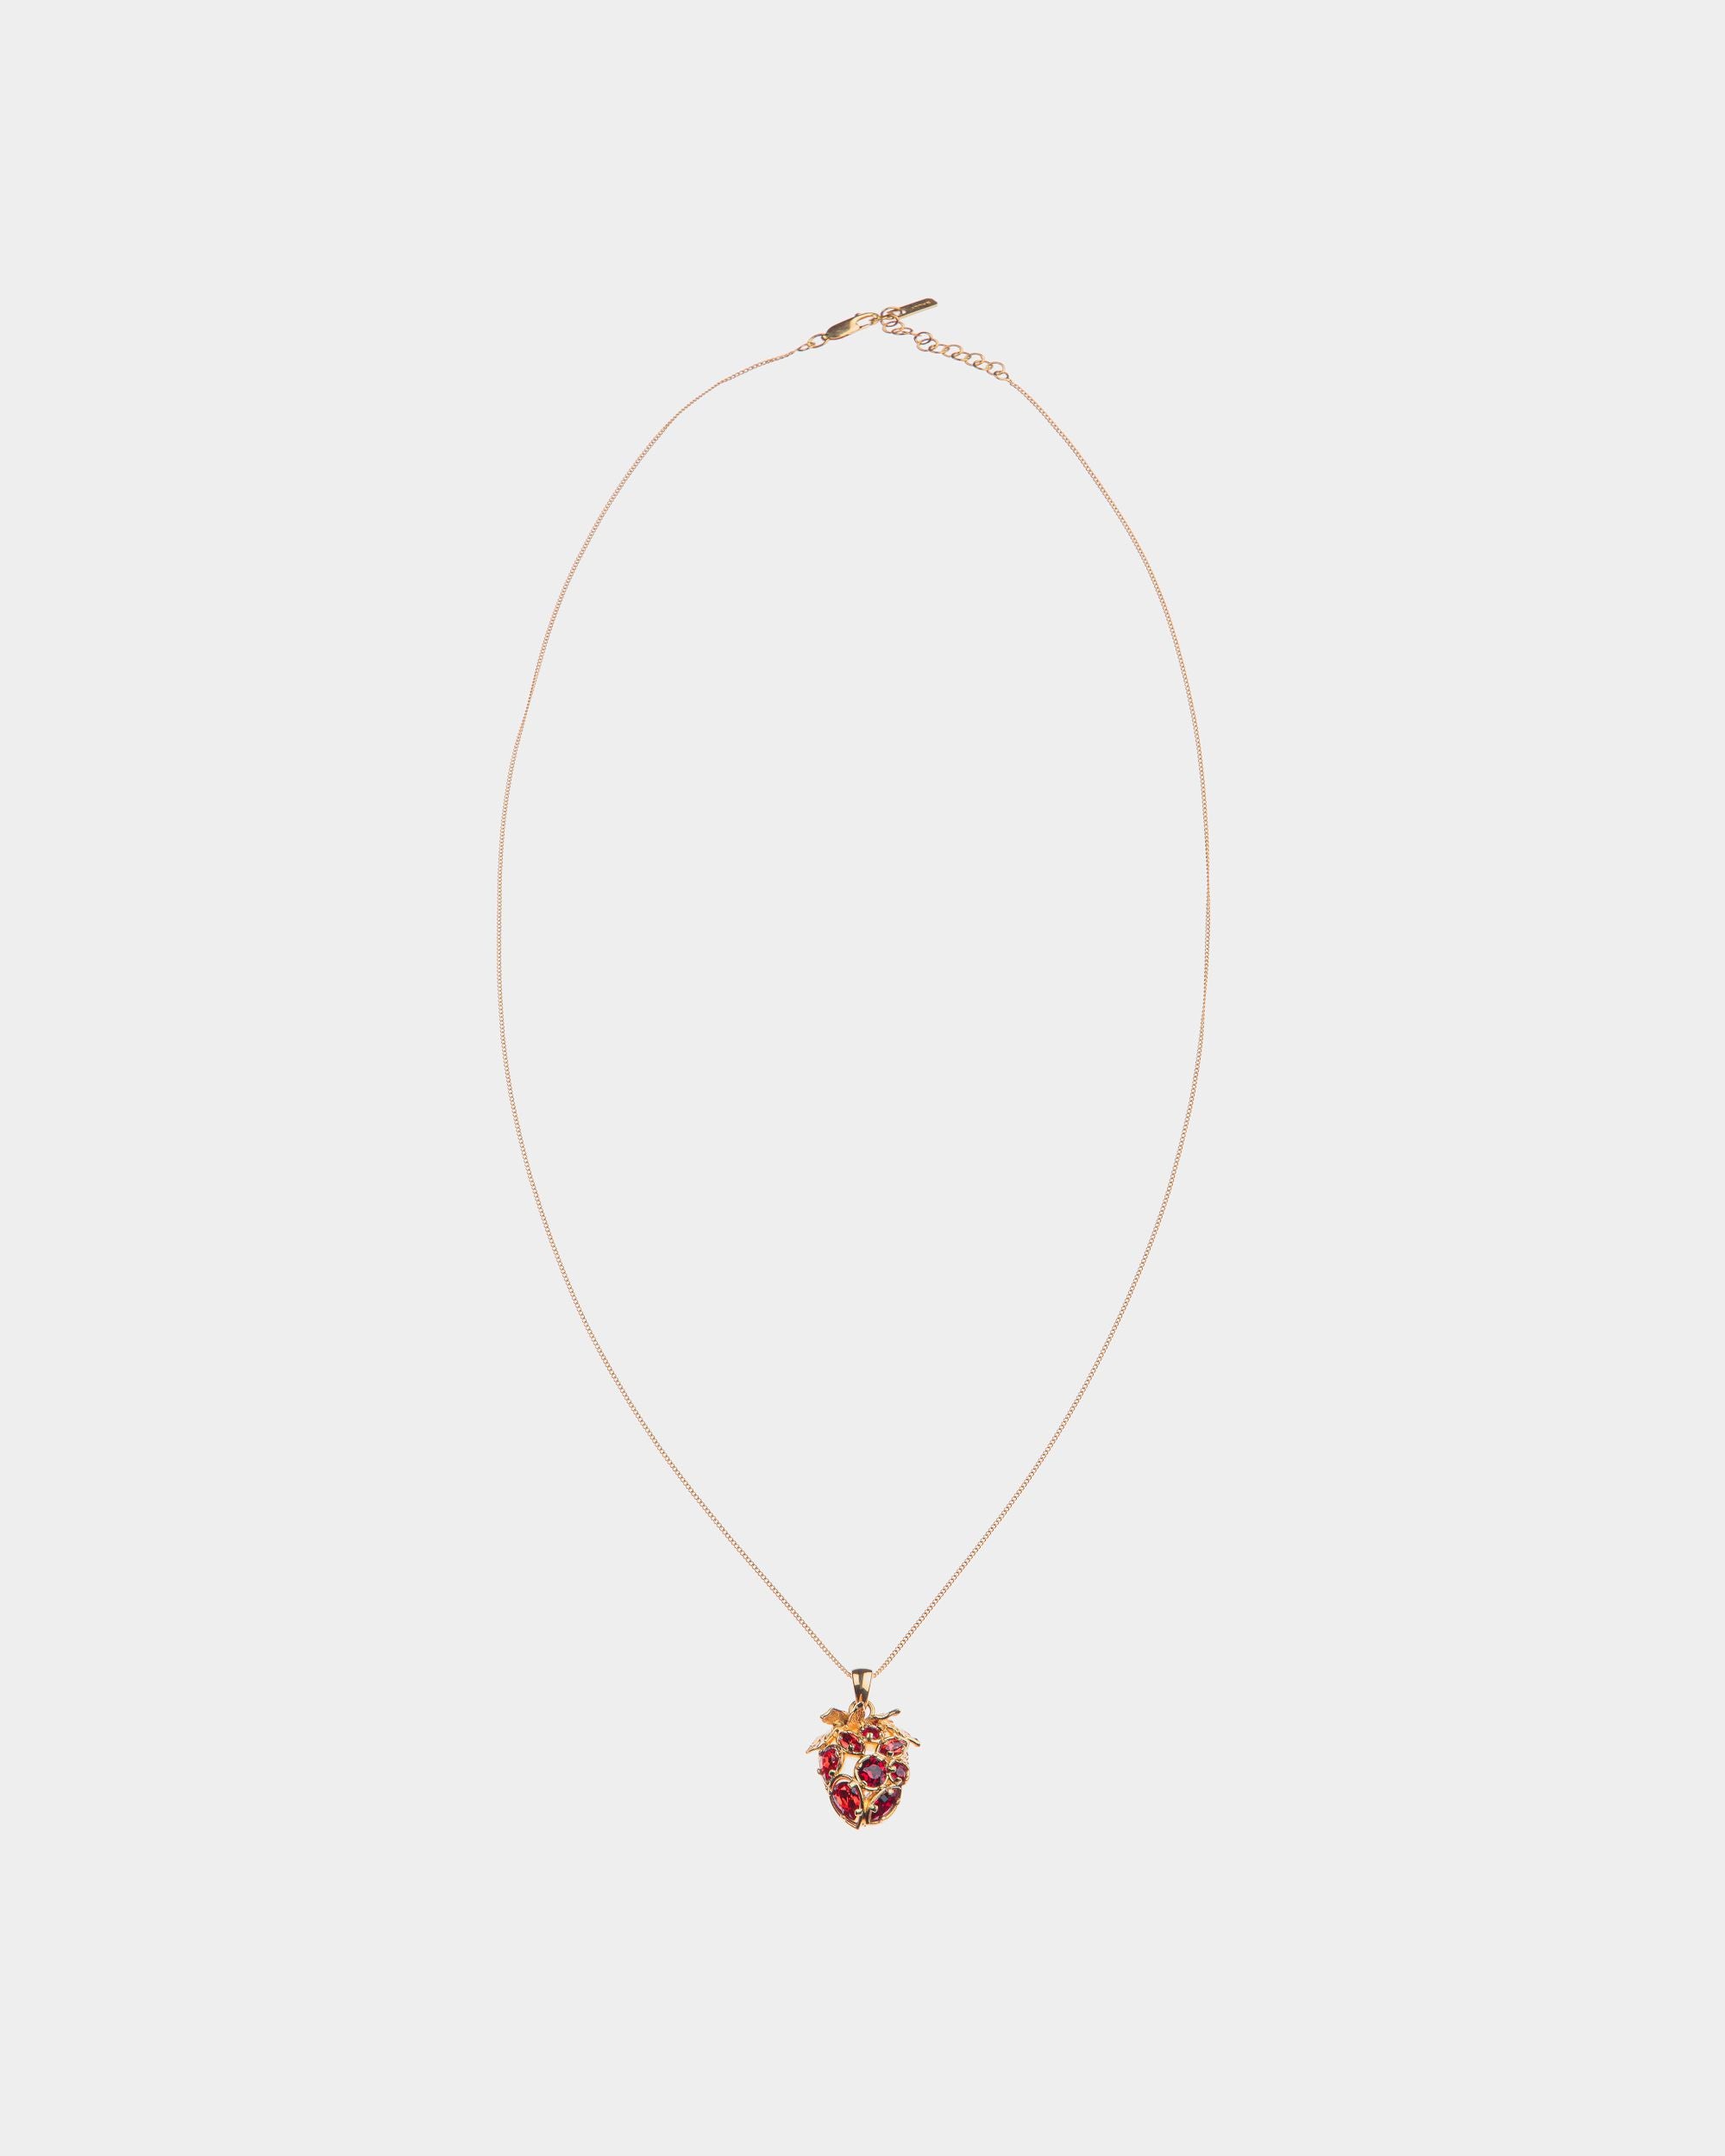 Deco | Women's Necklace in Gold Eco Brass and Crystals | Bally | Still Life Front